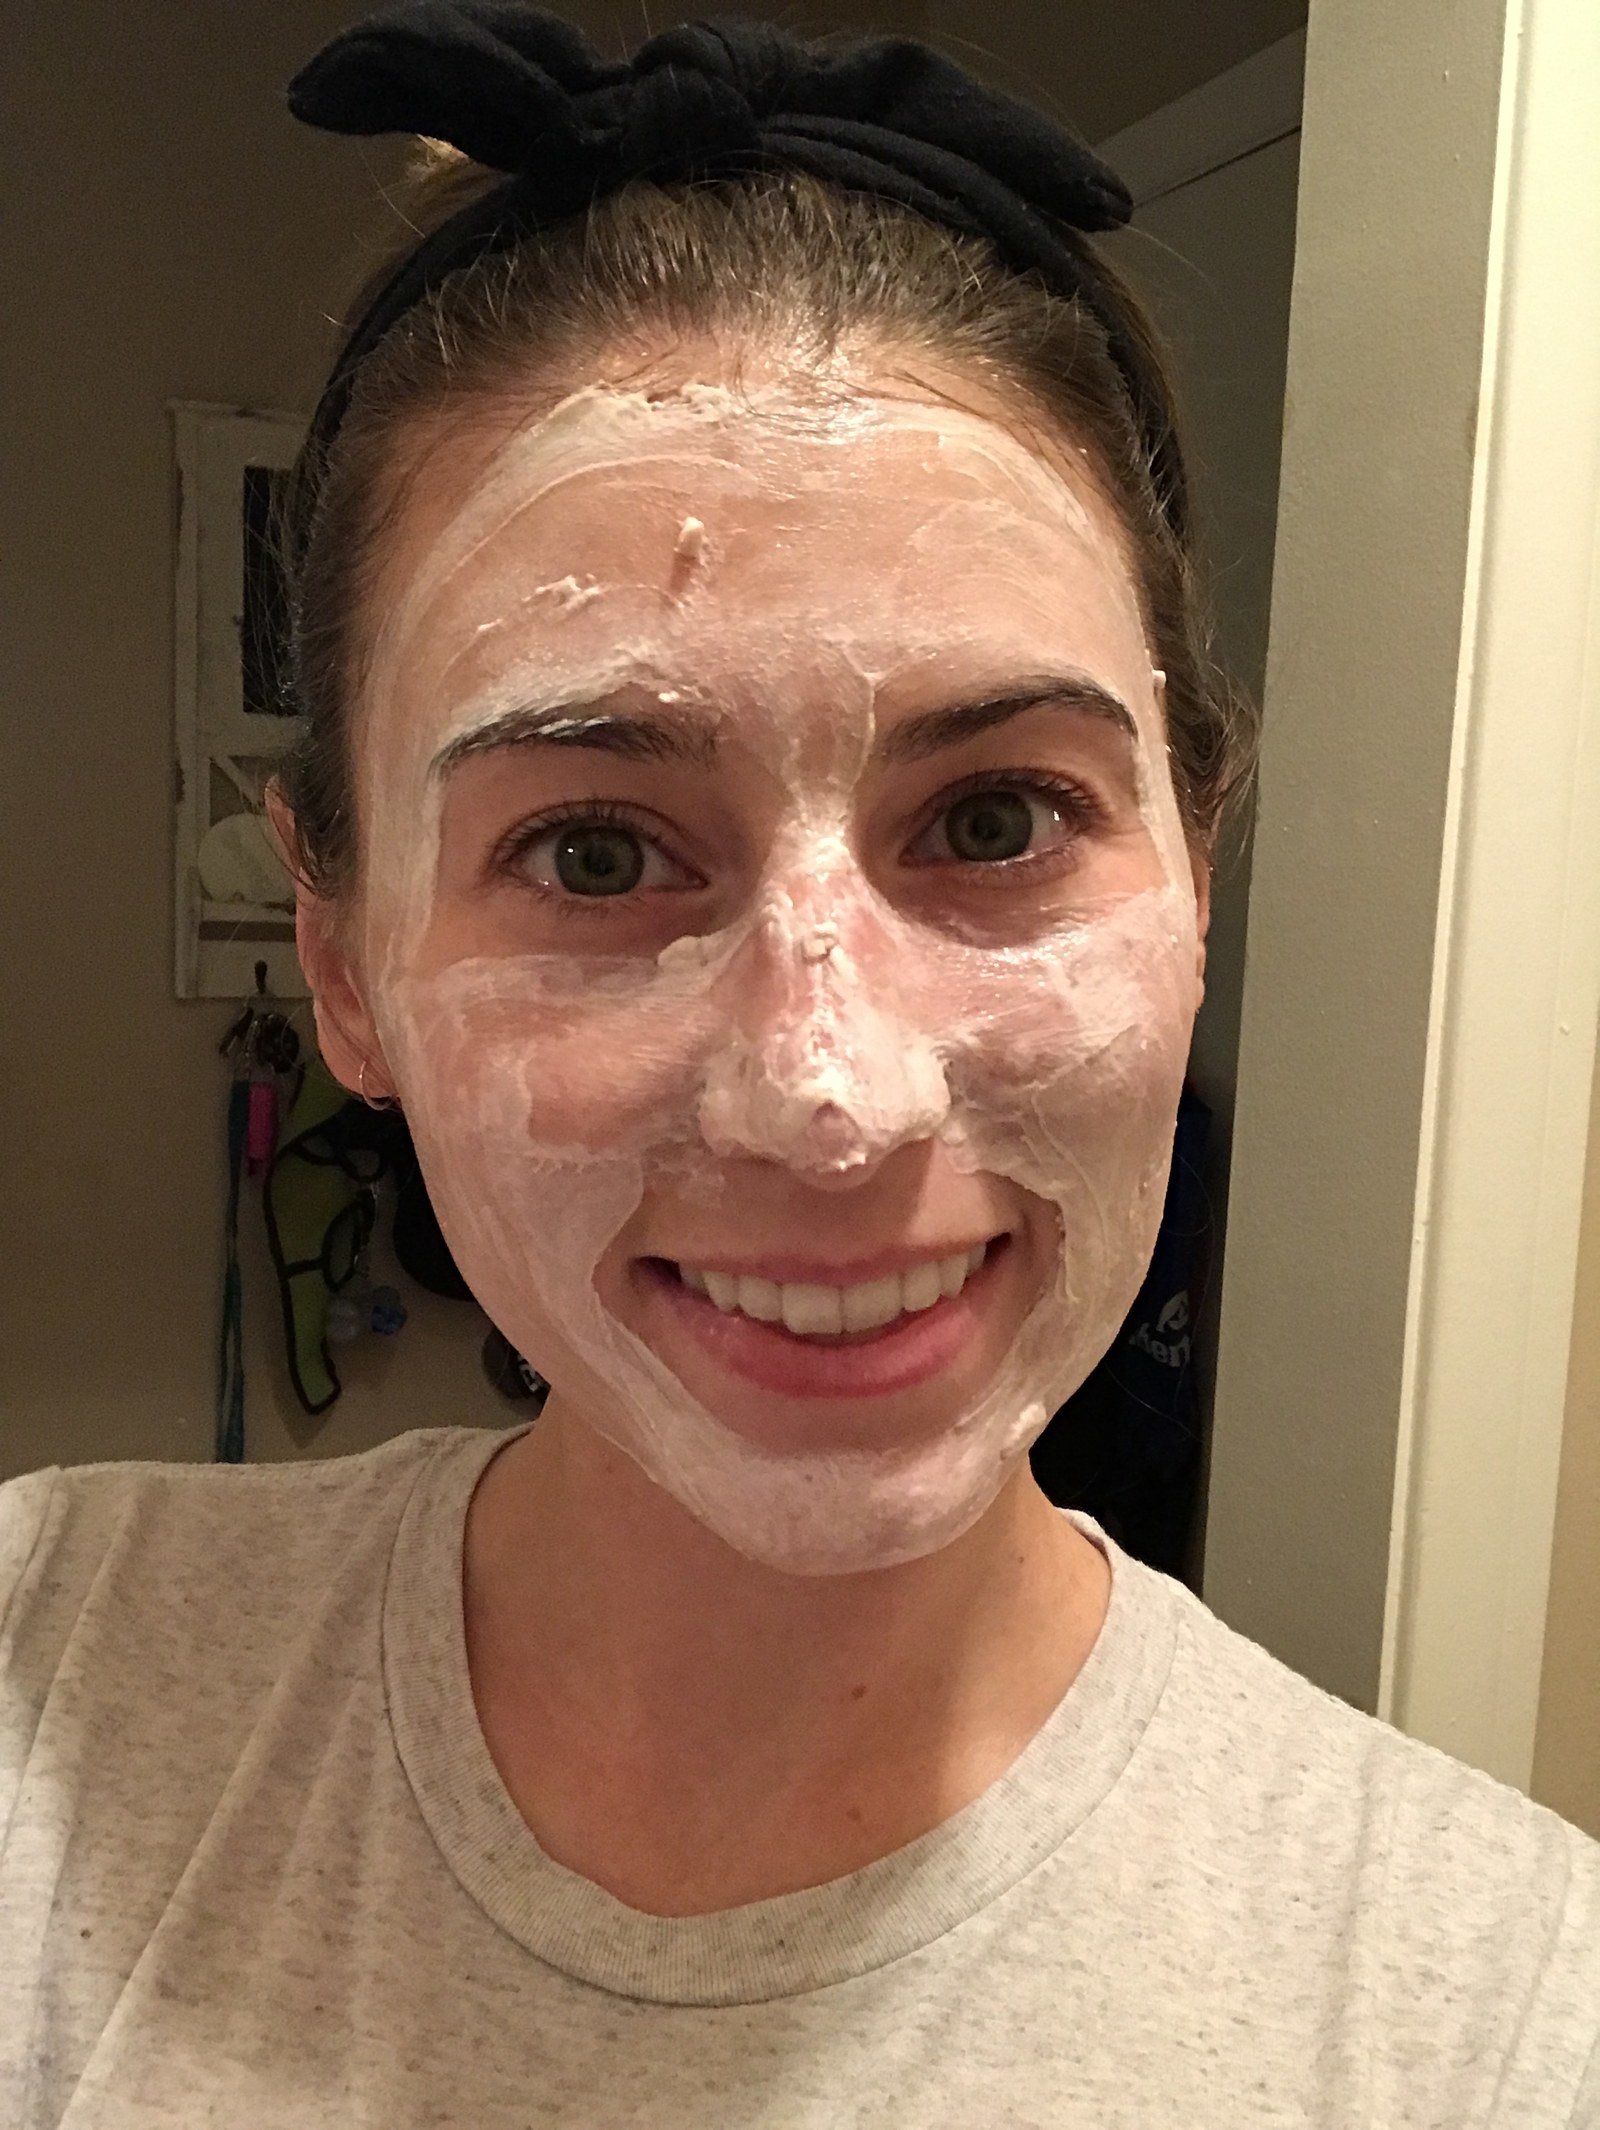 We Tested Out Lush’s New Jelly Face Masks And It Was Surprising